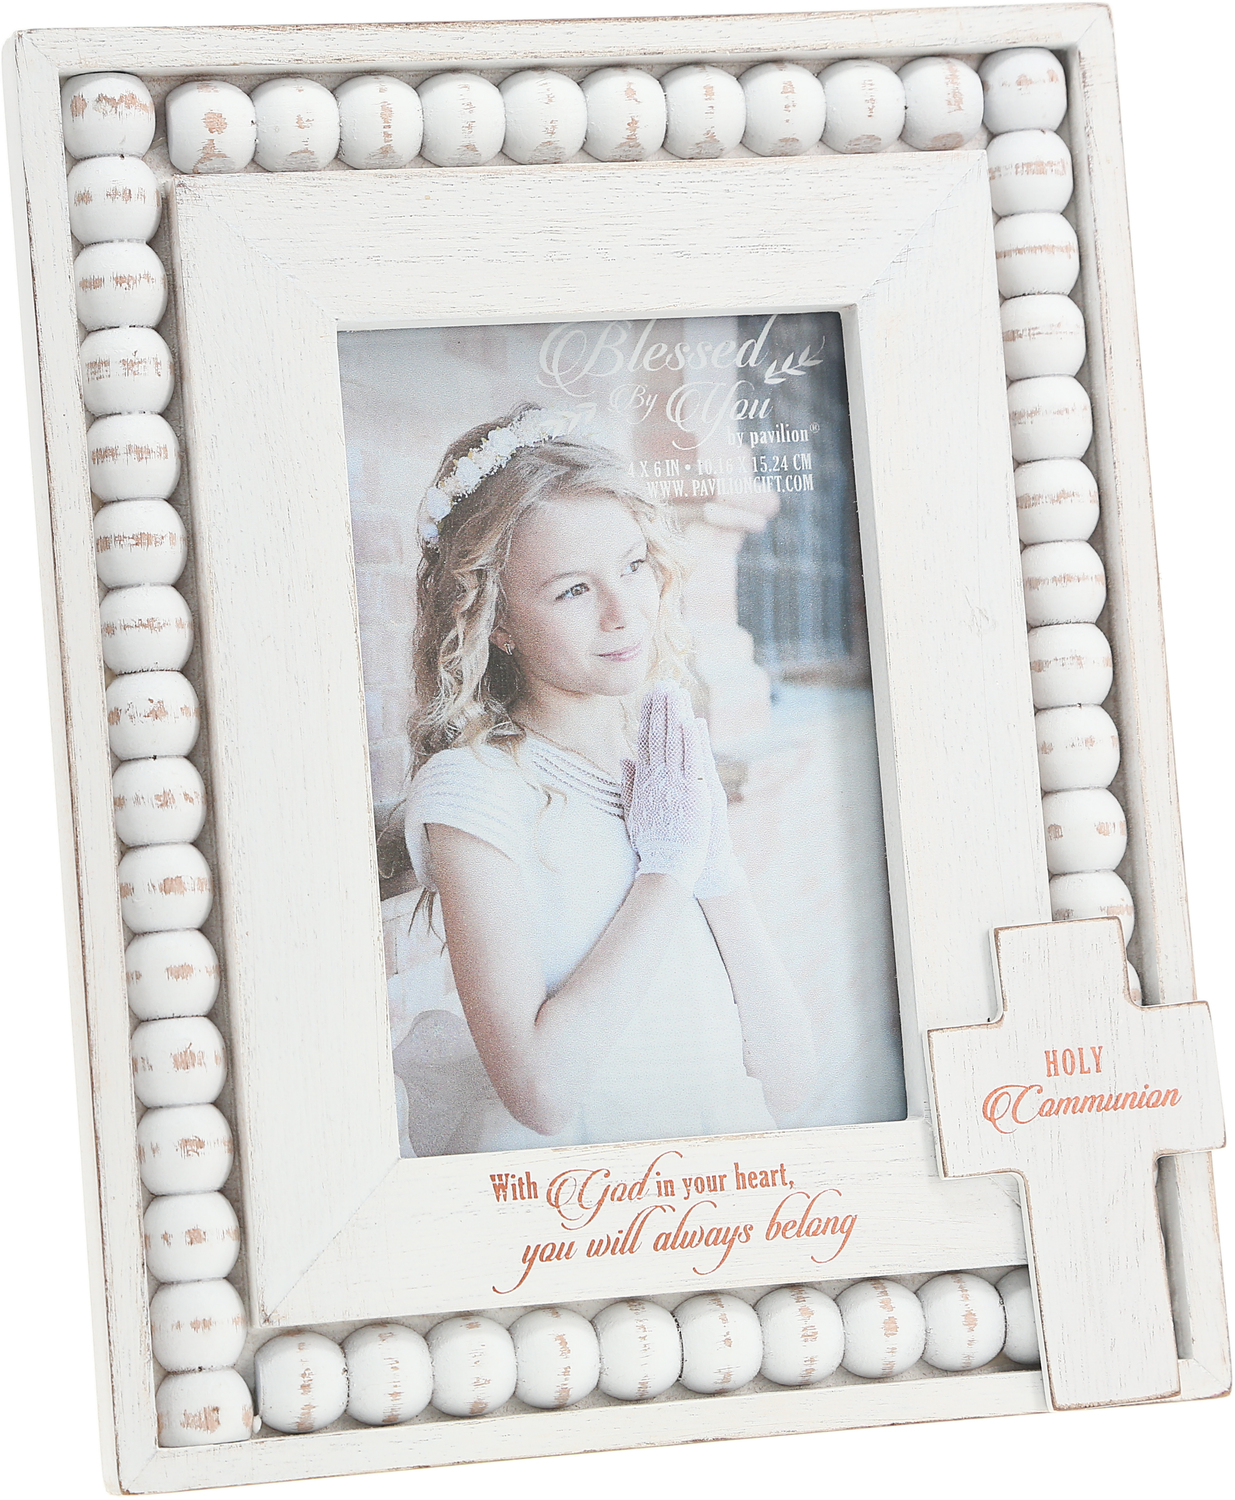 Holy Communion by Blessed by You - Holy Communion - 7.25" x 9.25" Frame (Holds a 4" x 6" photo)